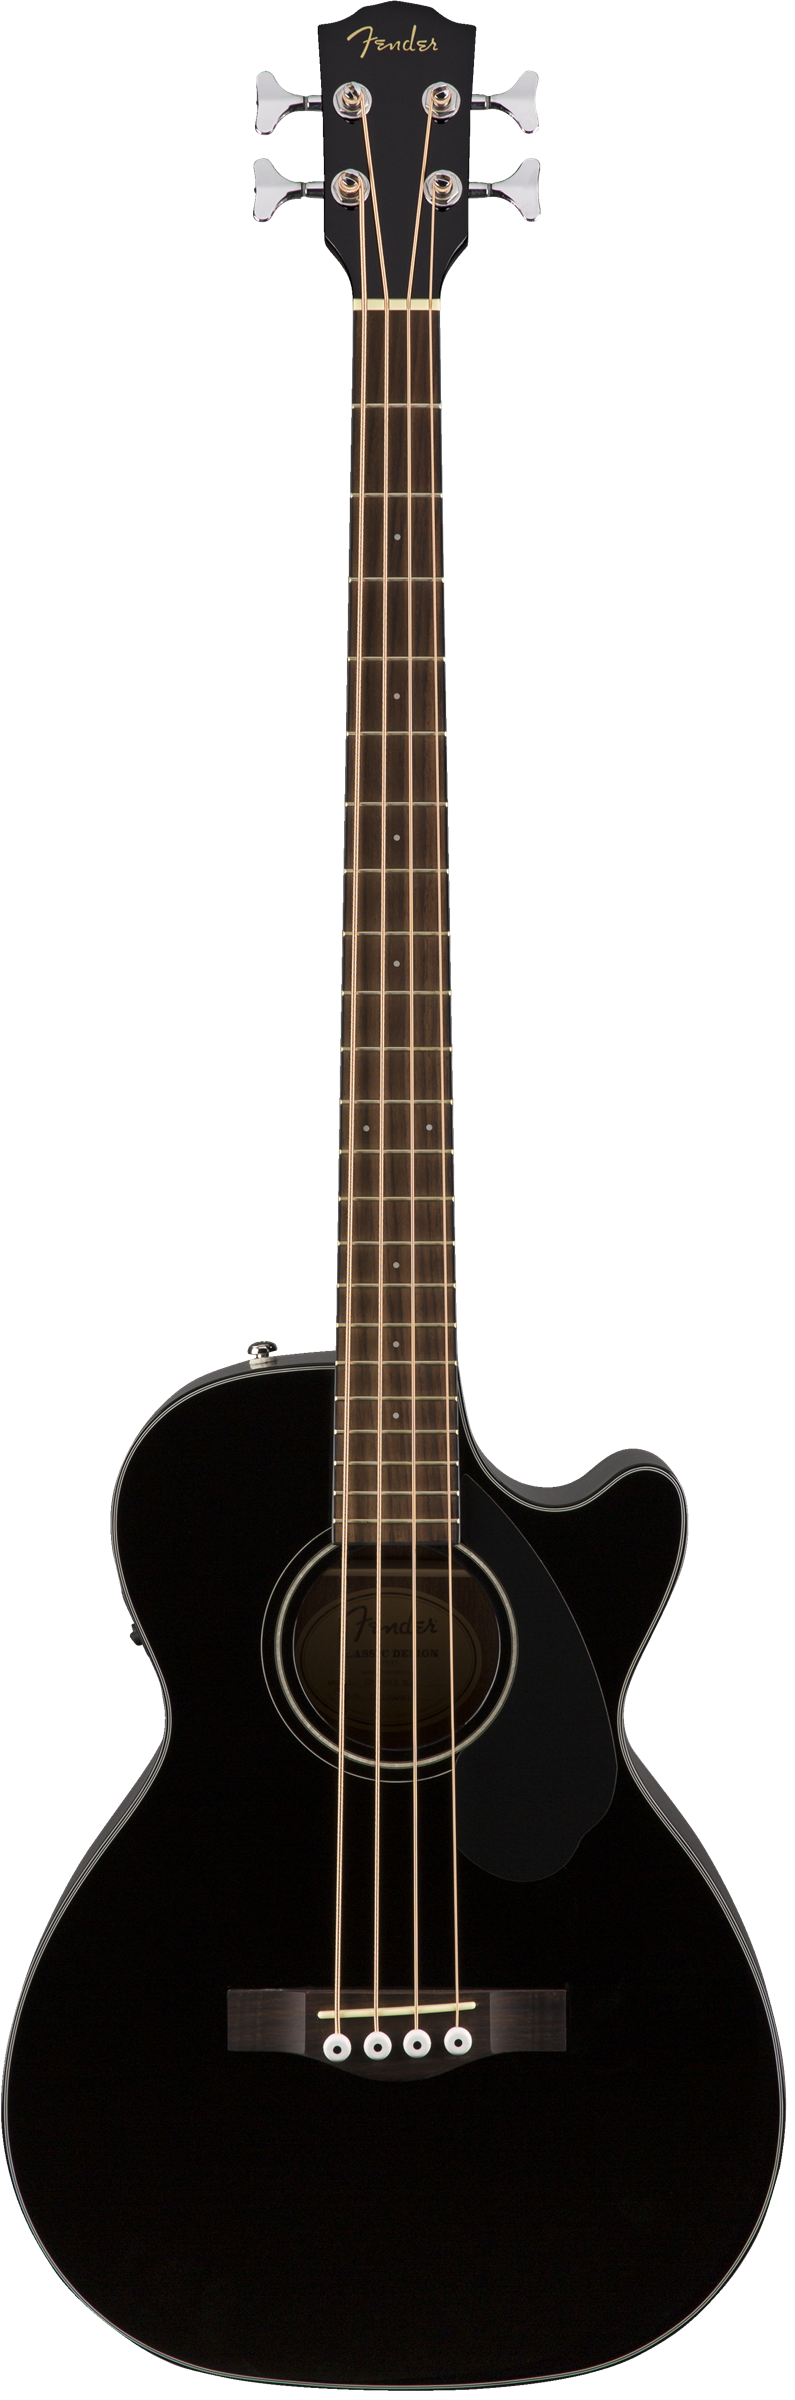 Fender CB-60sce Electric Acoustic Bass Guitar in Black